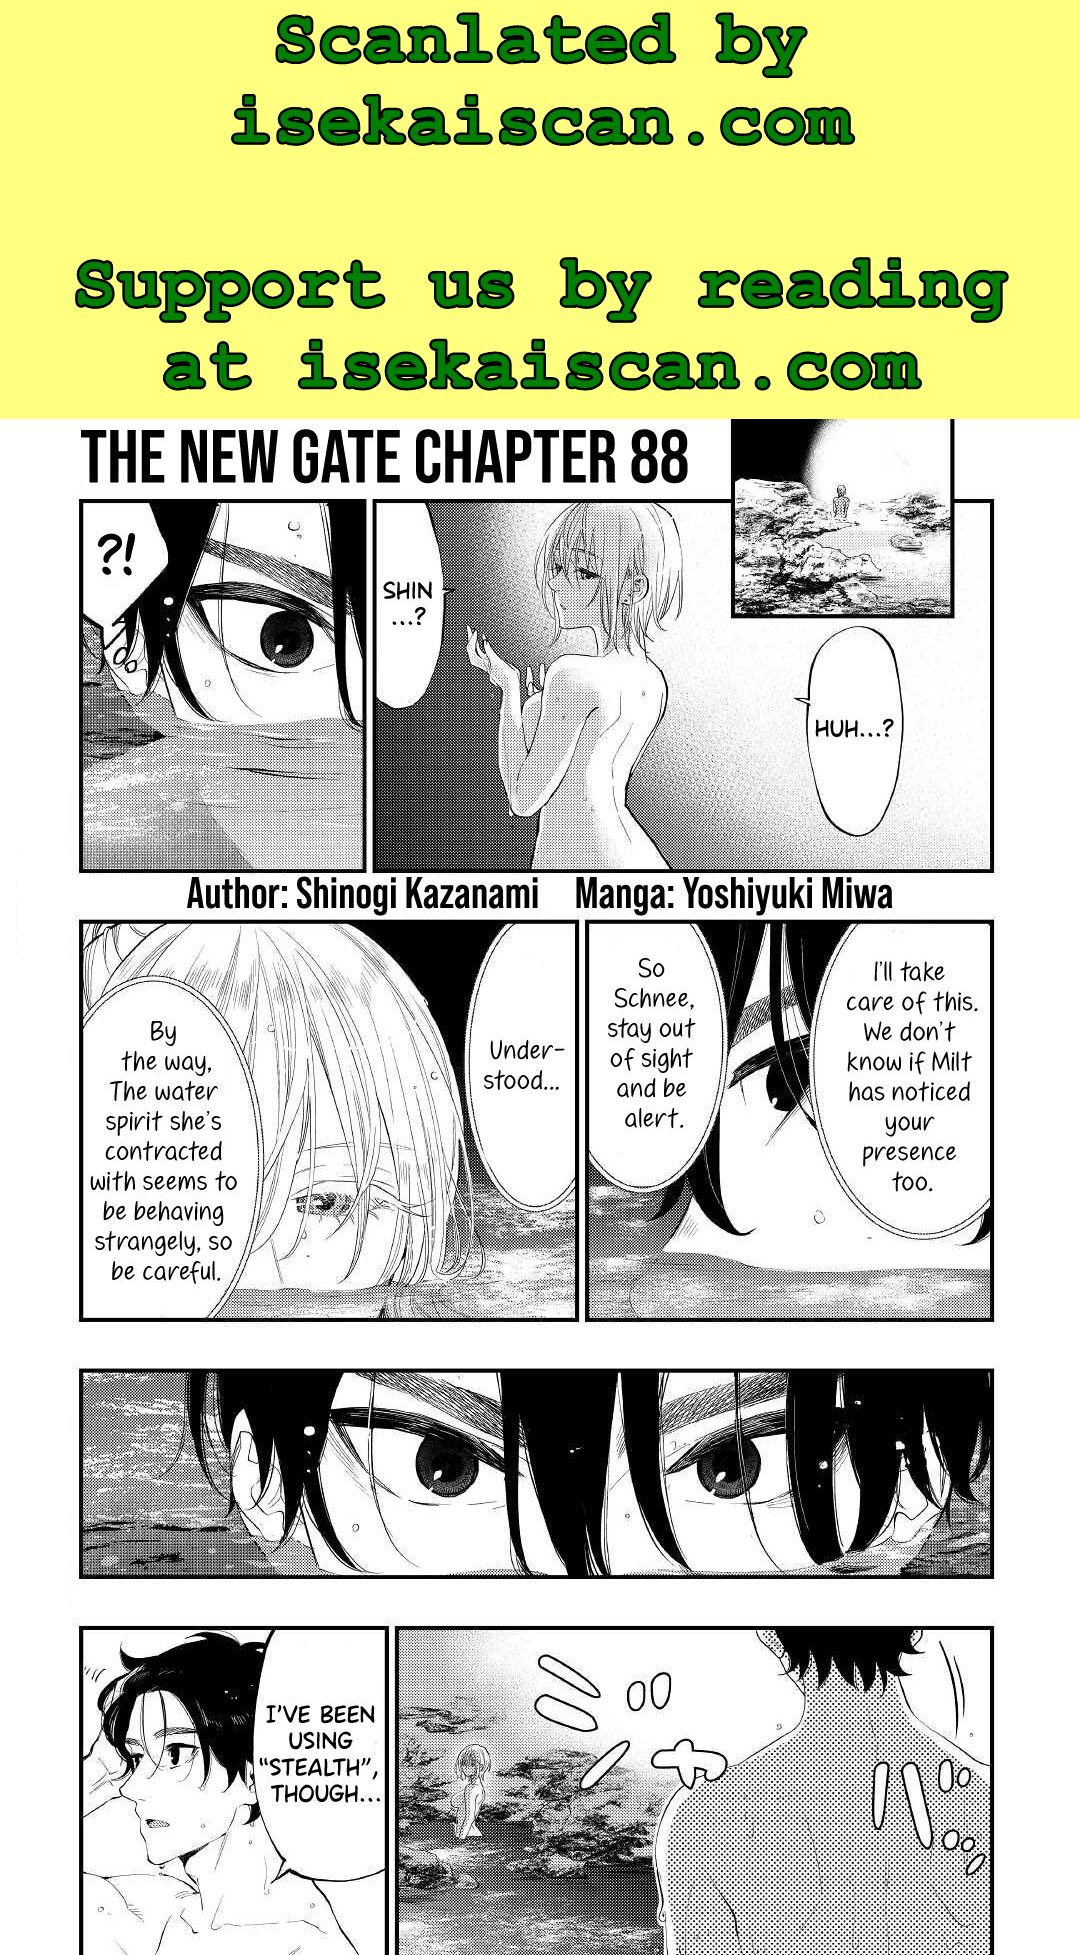 The New Gate Chapter 88 #1